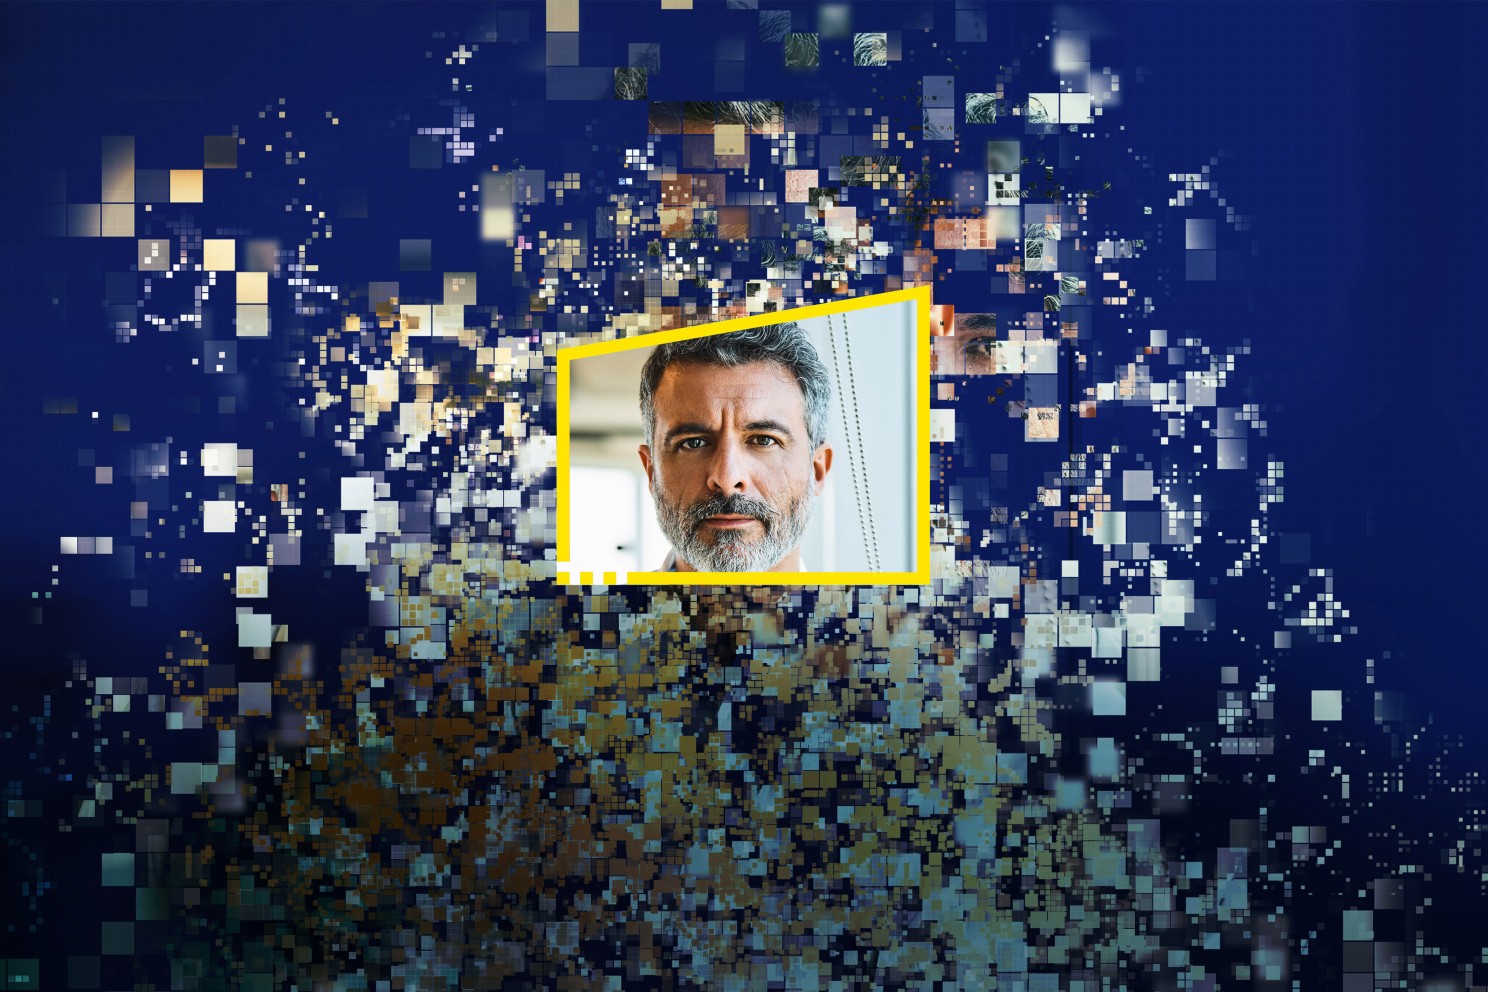 An abstract image of an older man's face within a yellow frame. Outside of the frame are lots of pixels spread out.